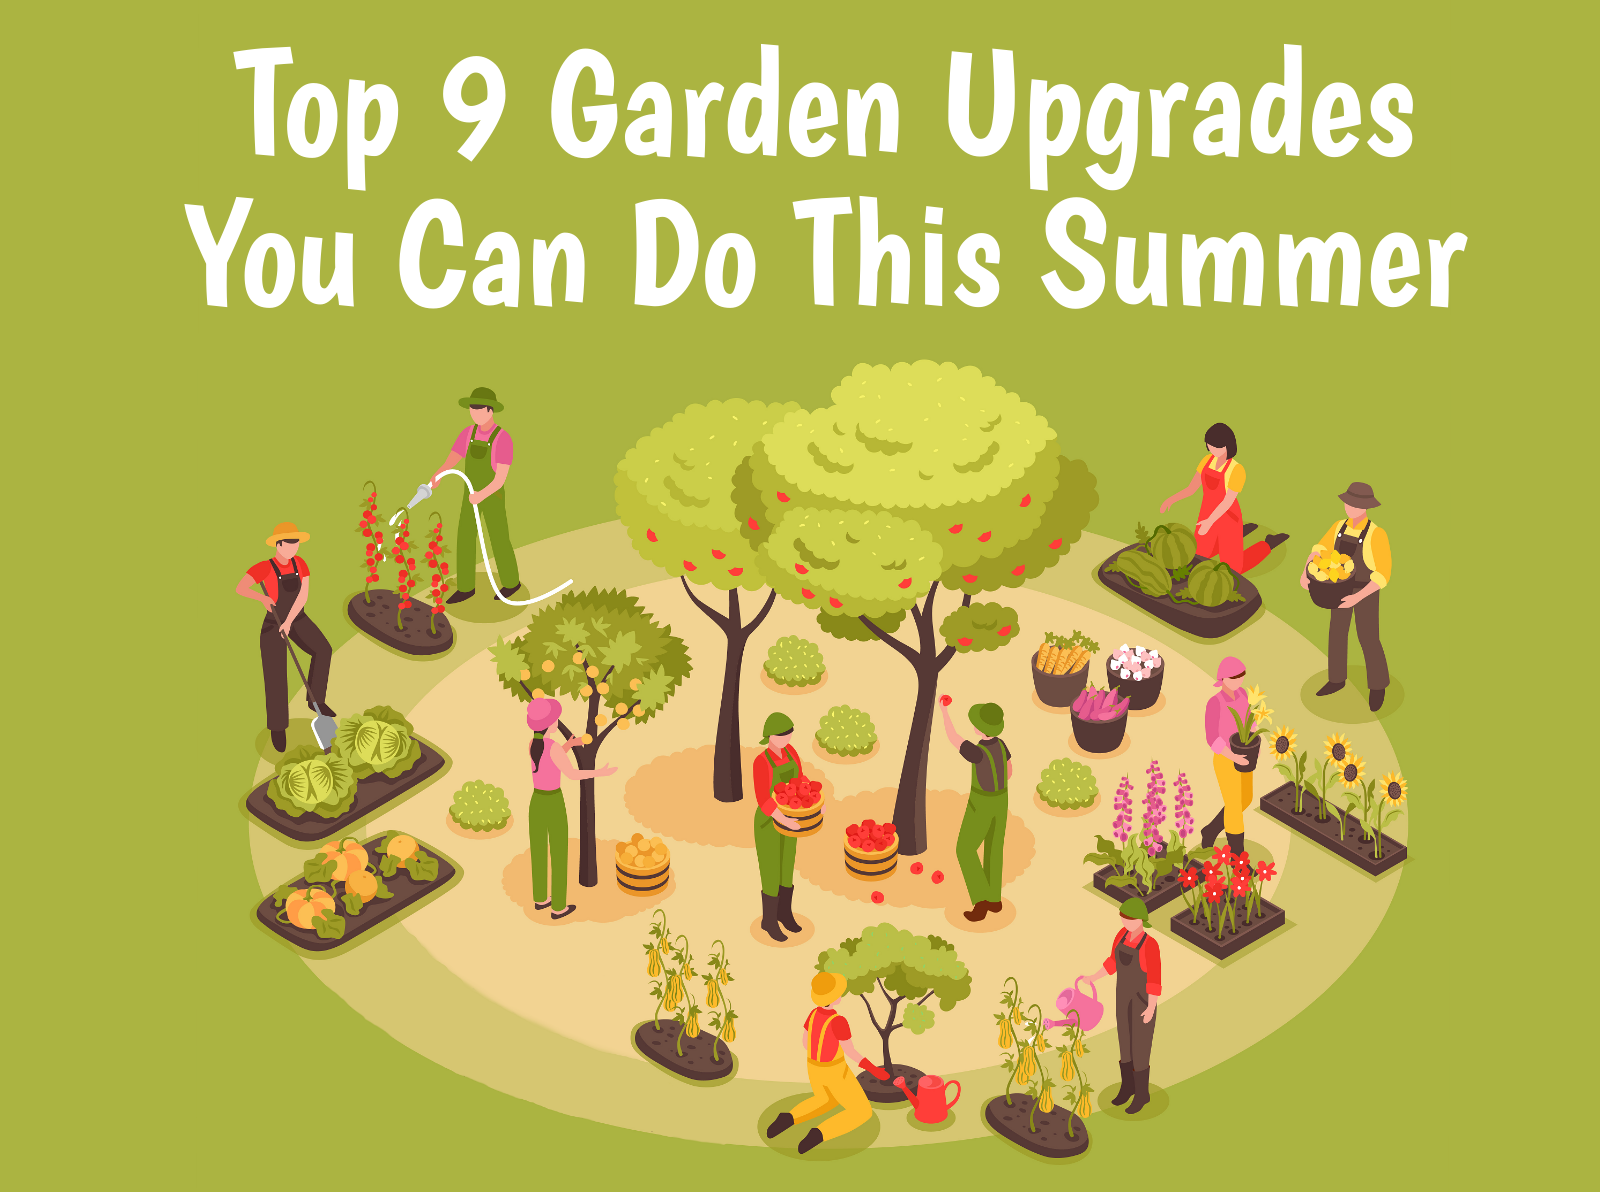 gardening activities you can do this summer